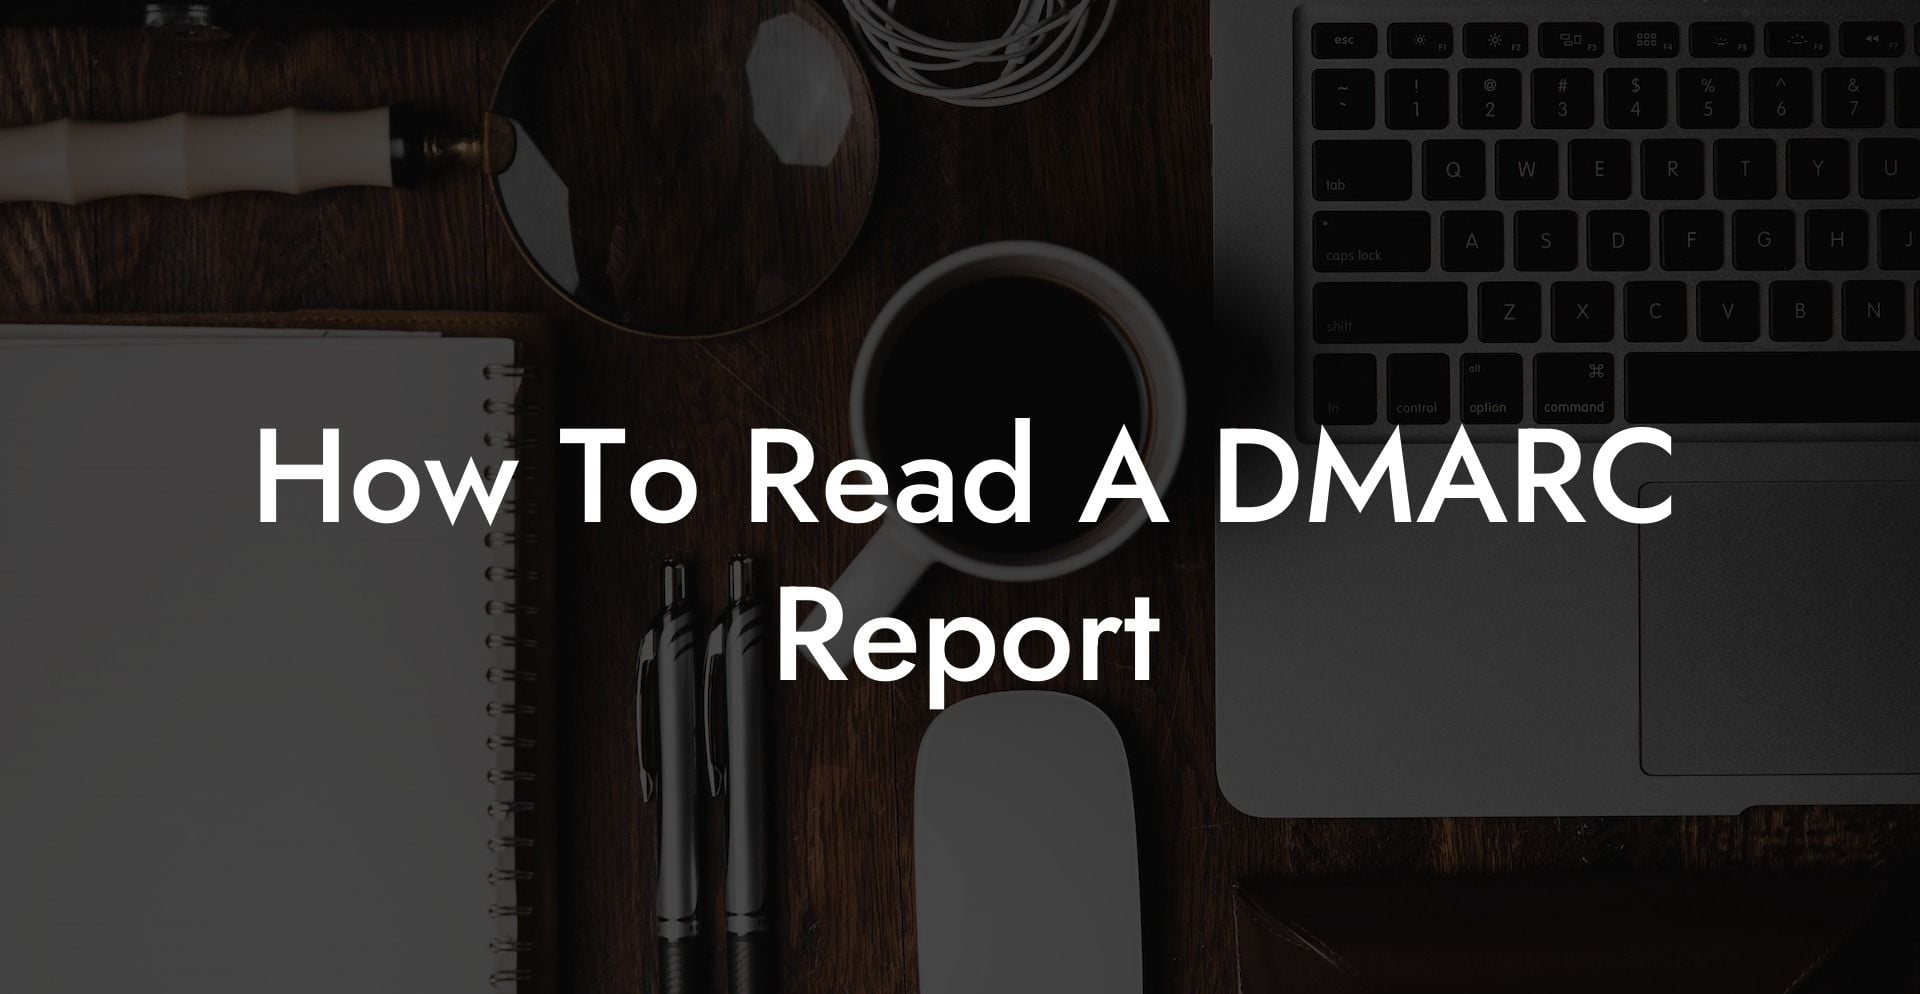 How To Read A DMARC Report